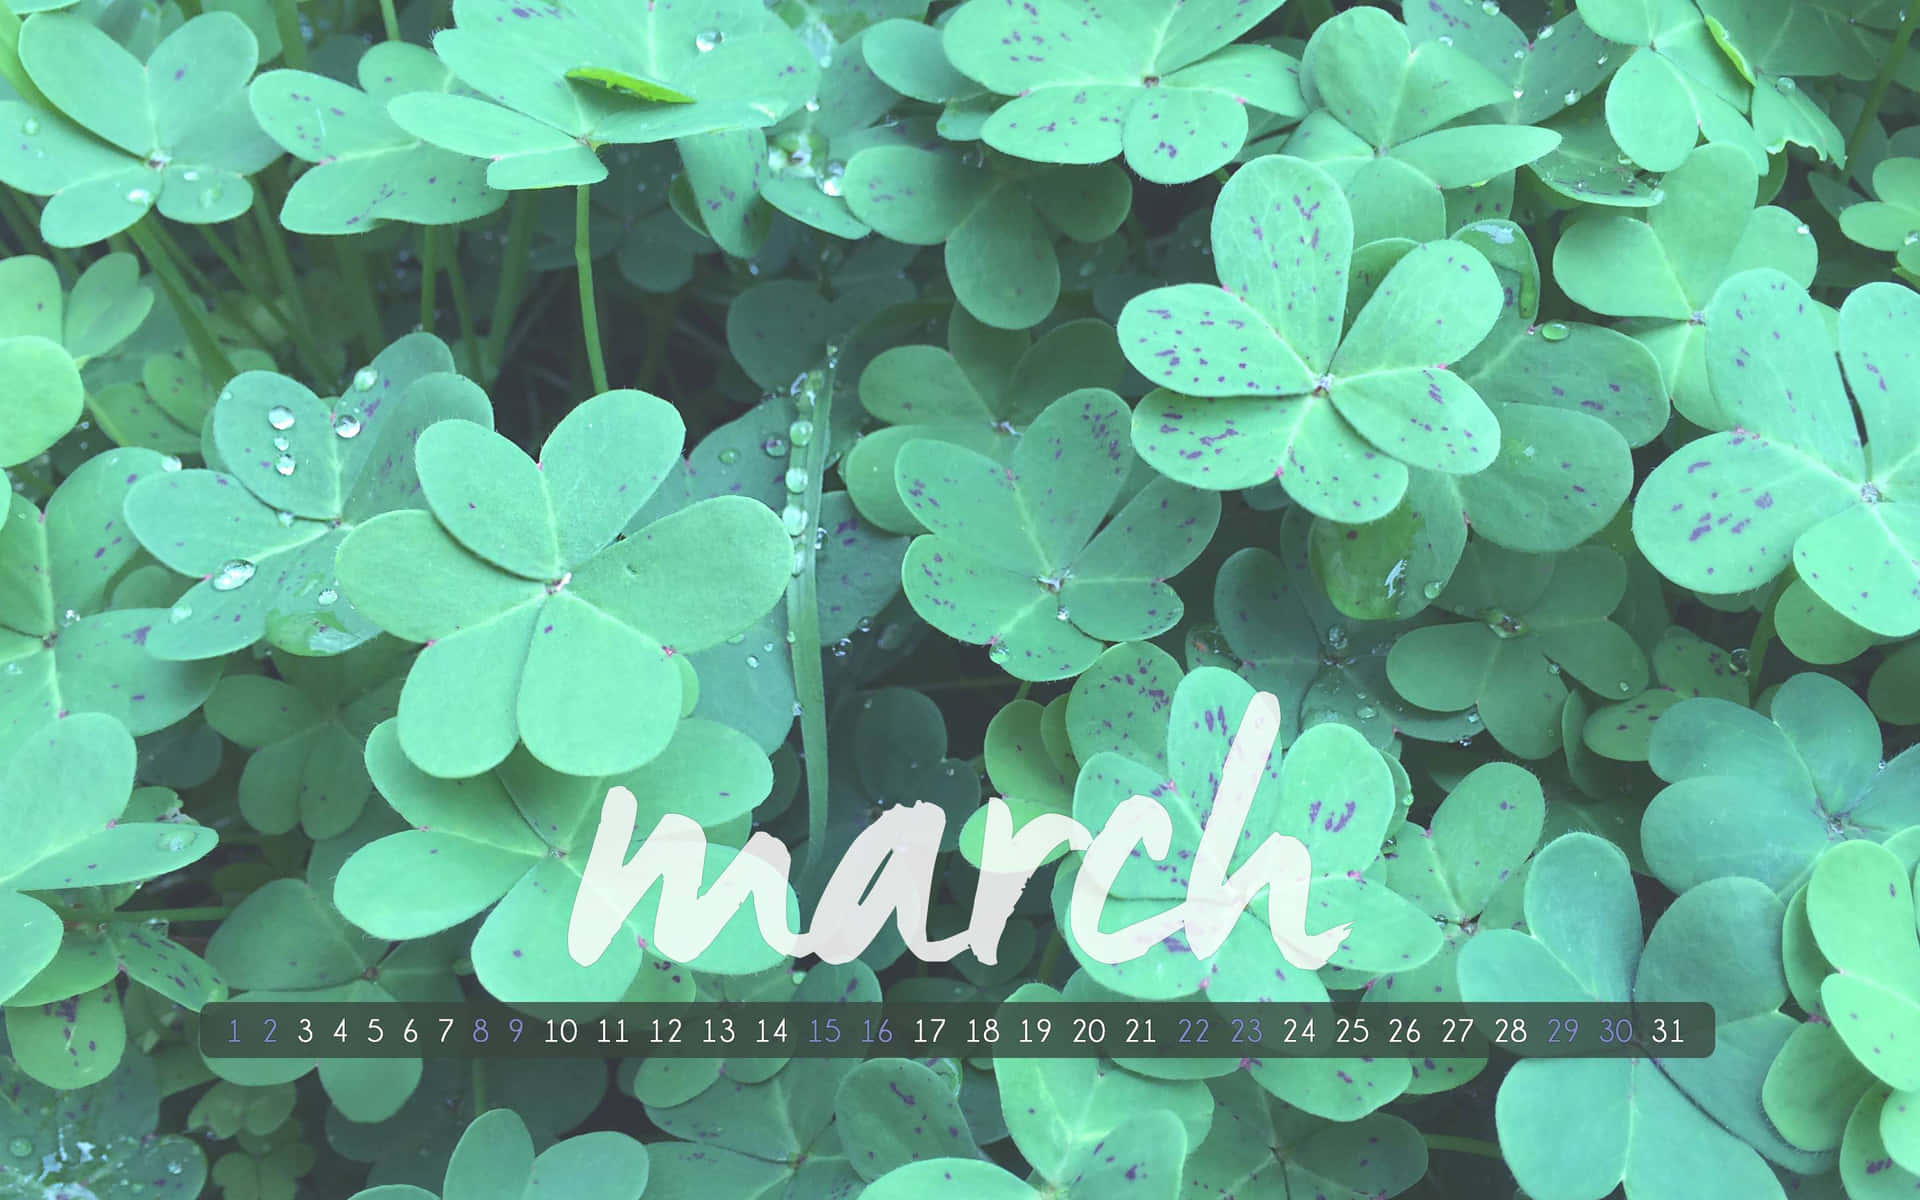 Celebrate the start of Spring with this cute March wallpaper! Wallpaper